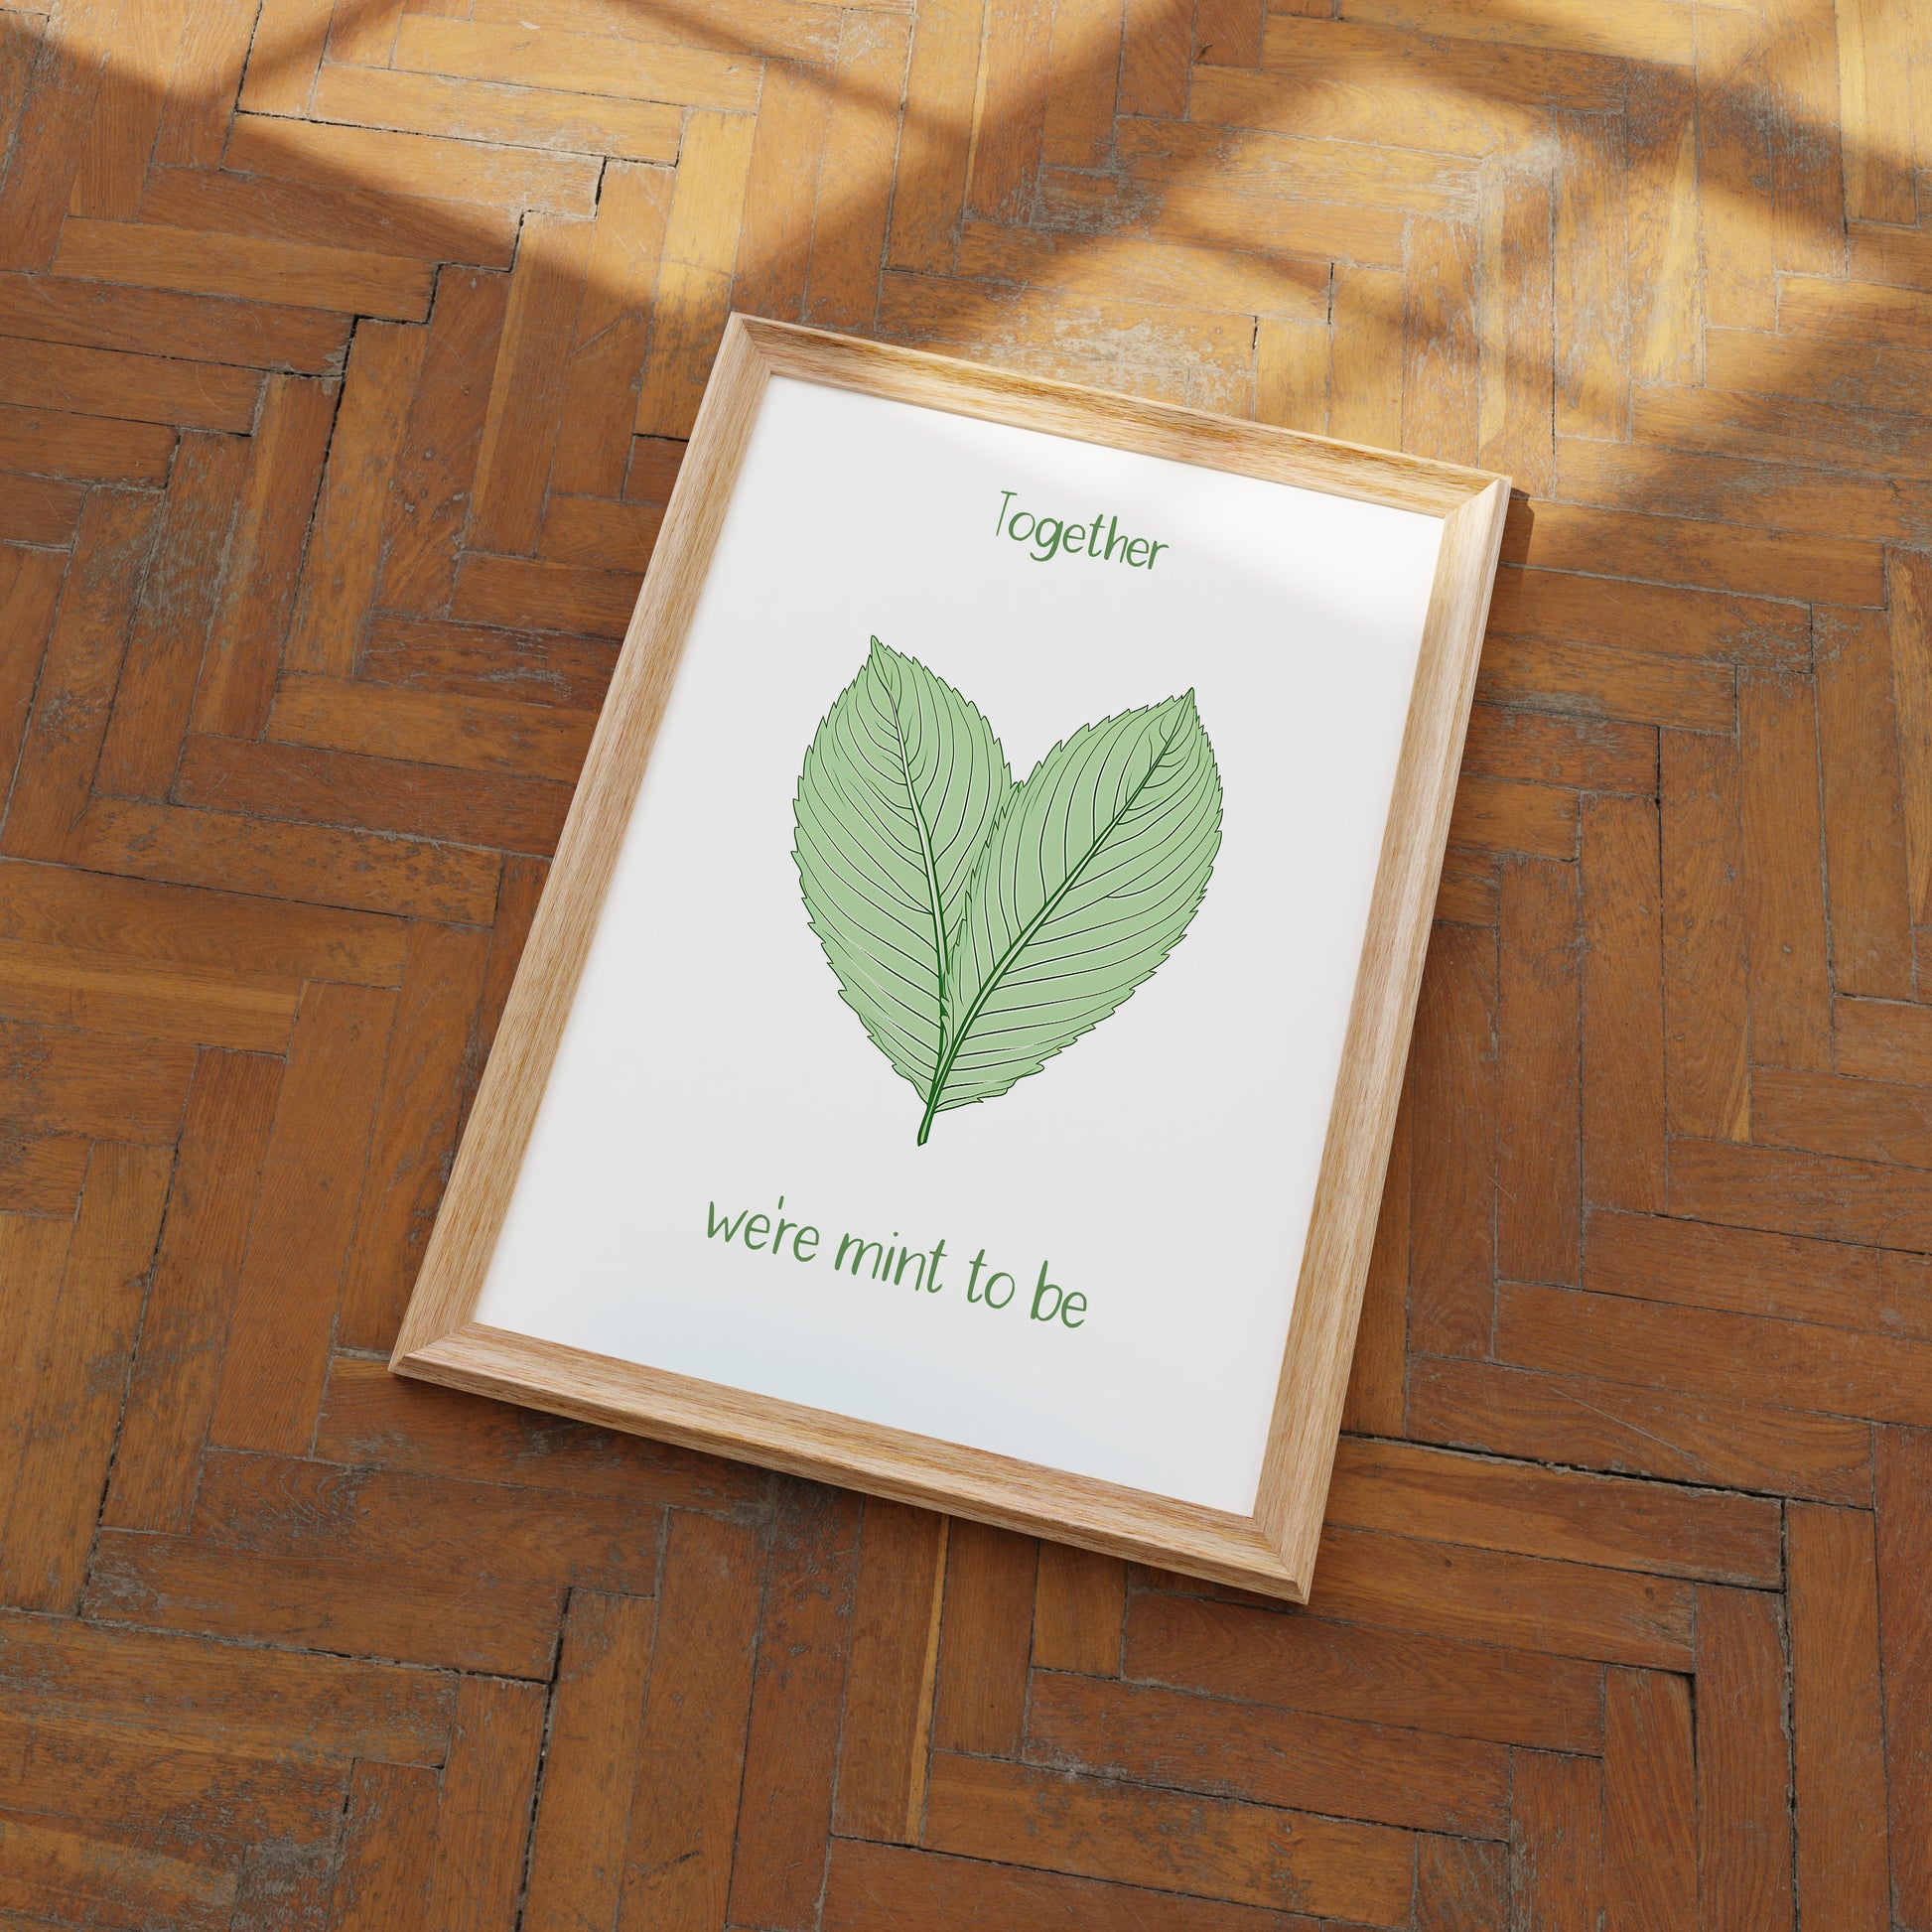 A framed picture with two leaves and the words "Together we're mint to be" on a wooden floor.